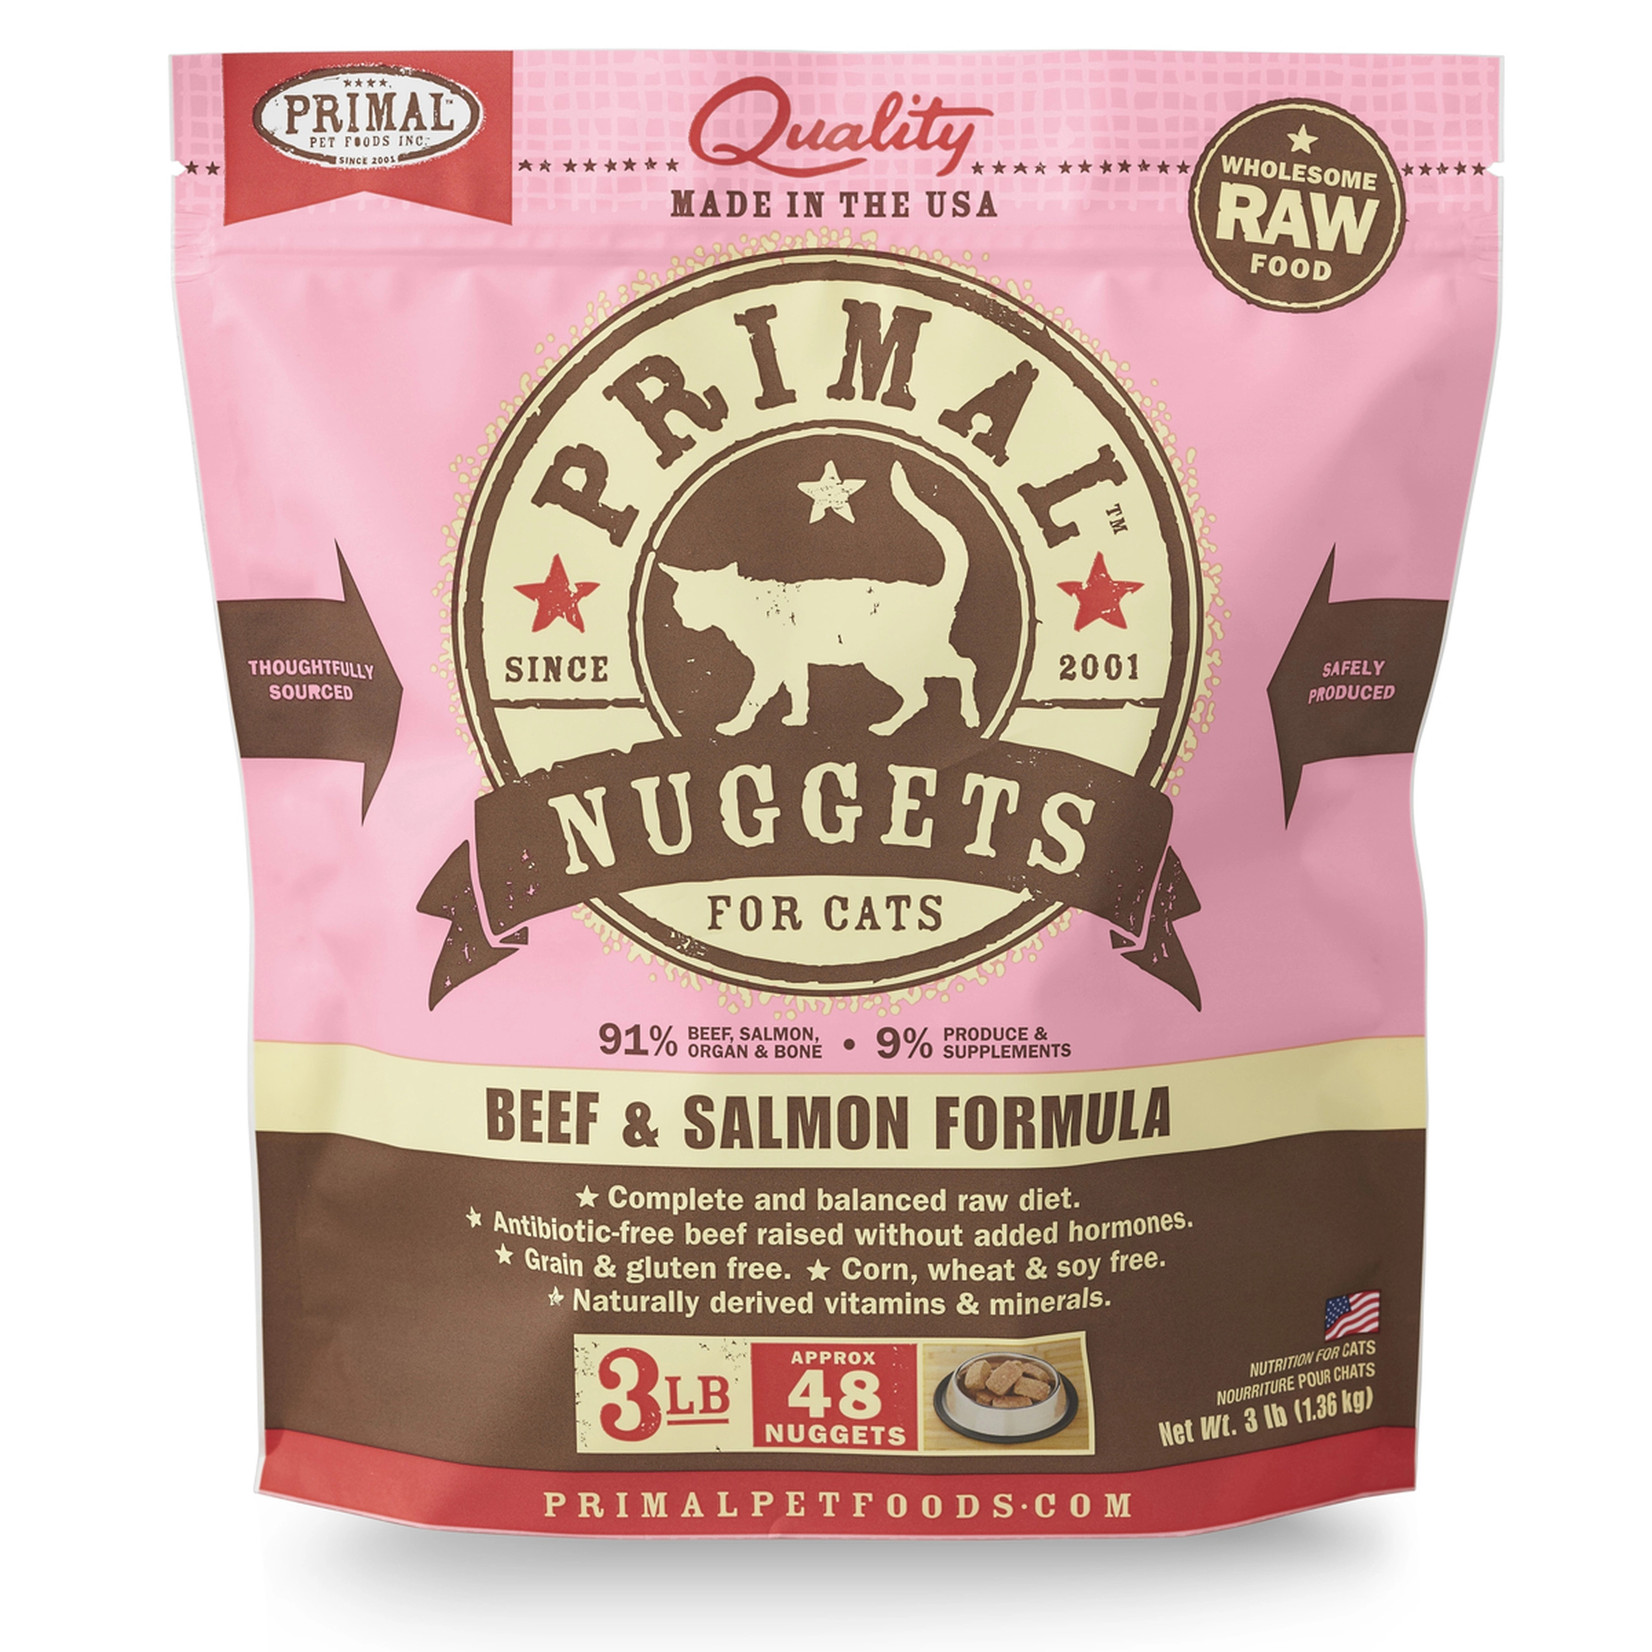 Primal Pet Foods Primal Frozen Raw Nuggets - Beef & Salmon Formula for Cats